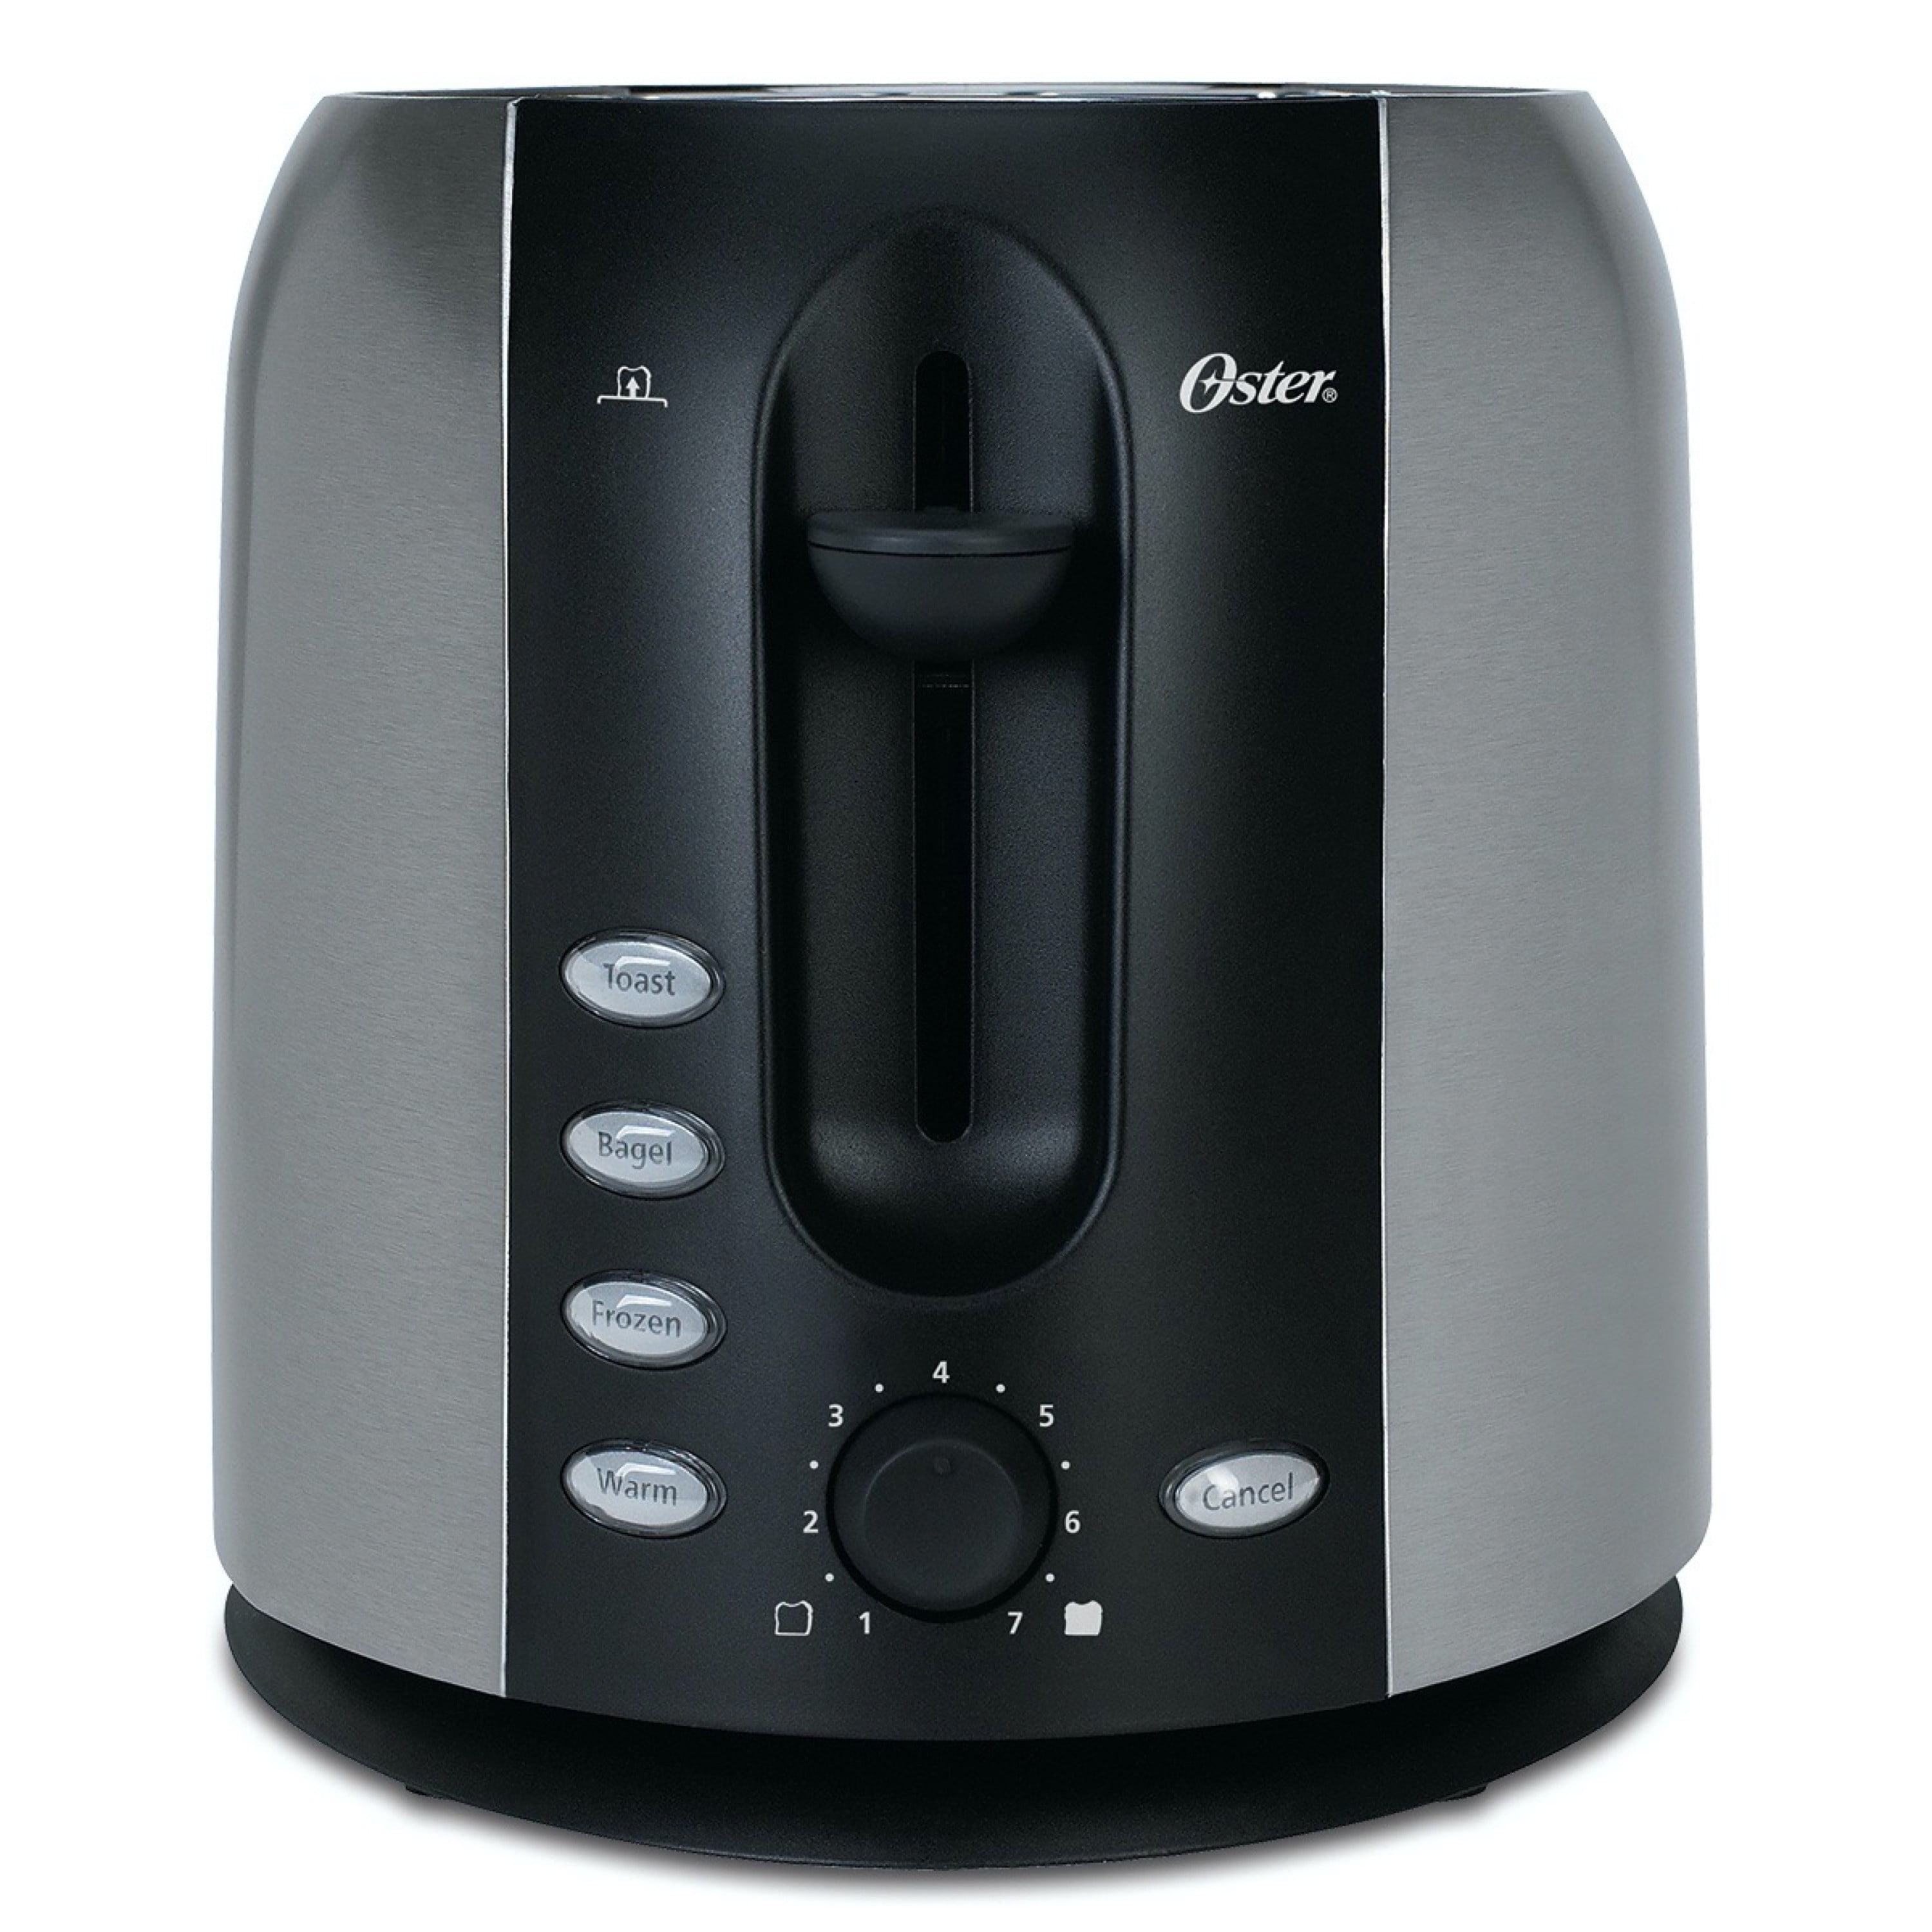 Oster® 2-Slice Toaster with Quick-Check Lever, Extra-Wide Slots